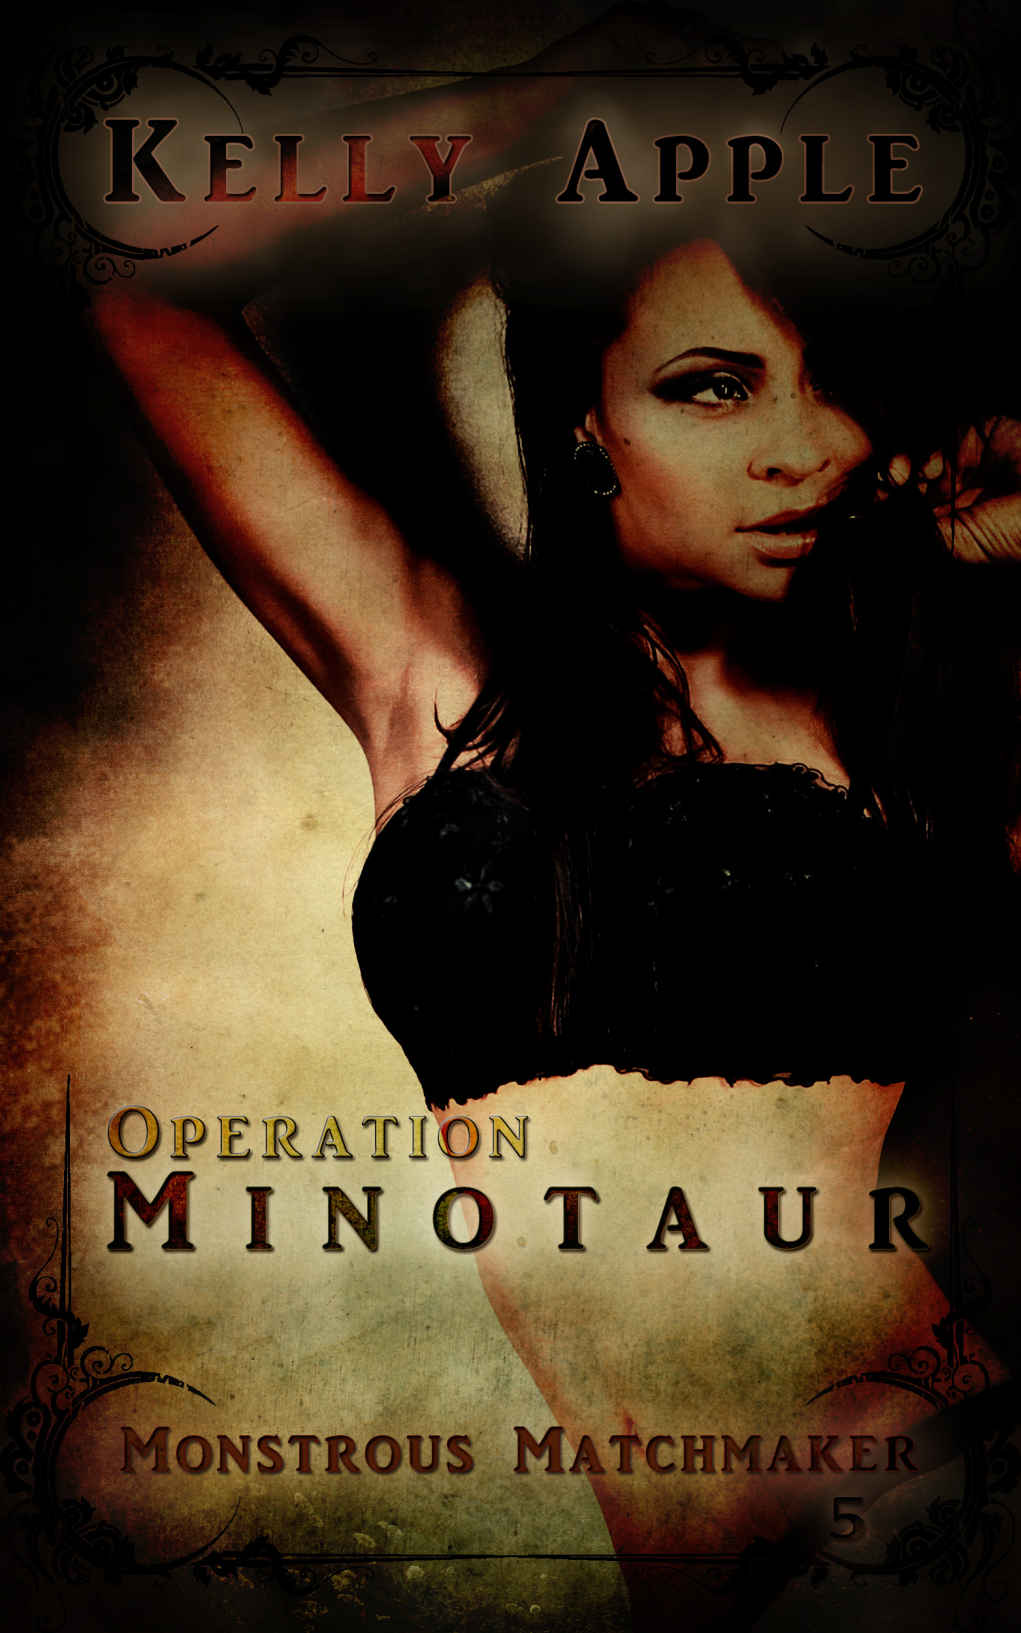 Operation Minotaur (Monstrous Matchmaker Book 5) by Kelly Apple